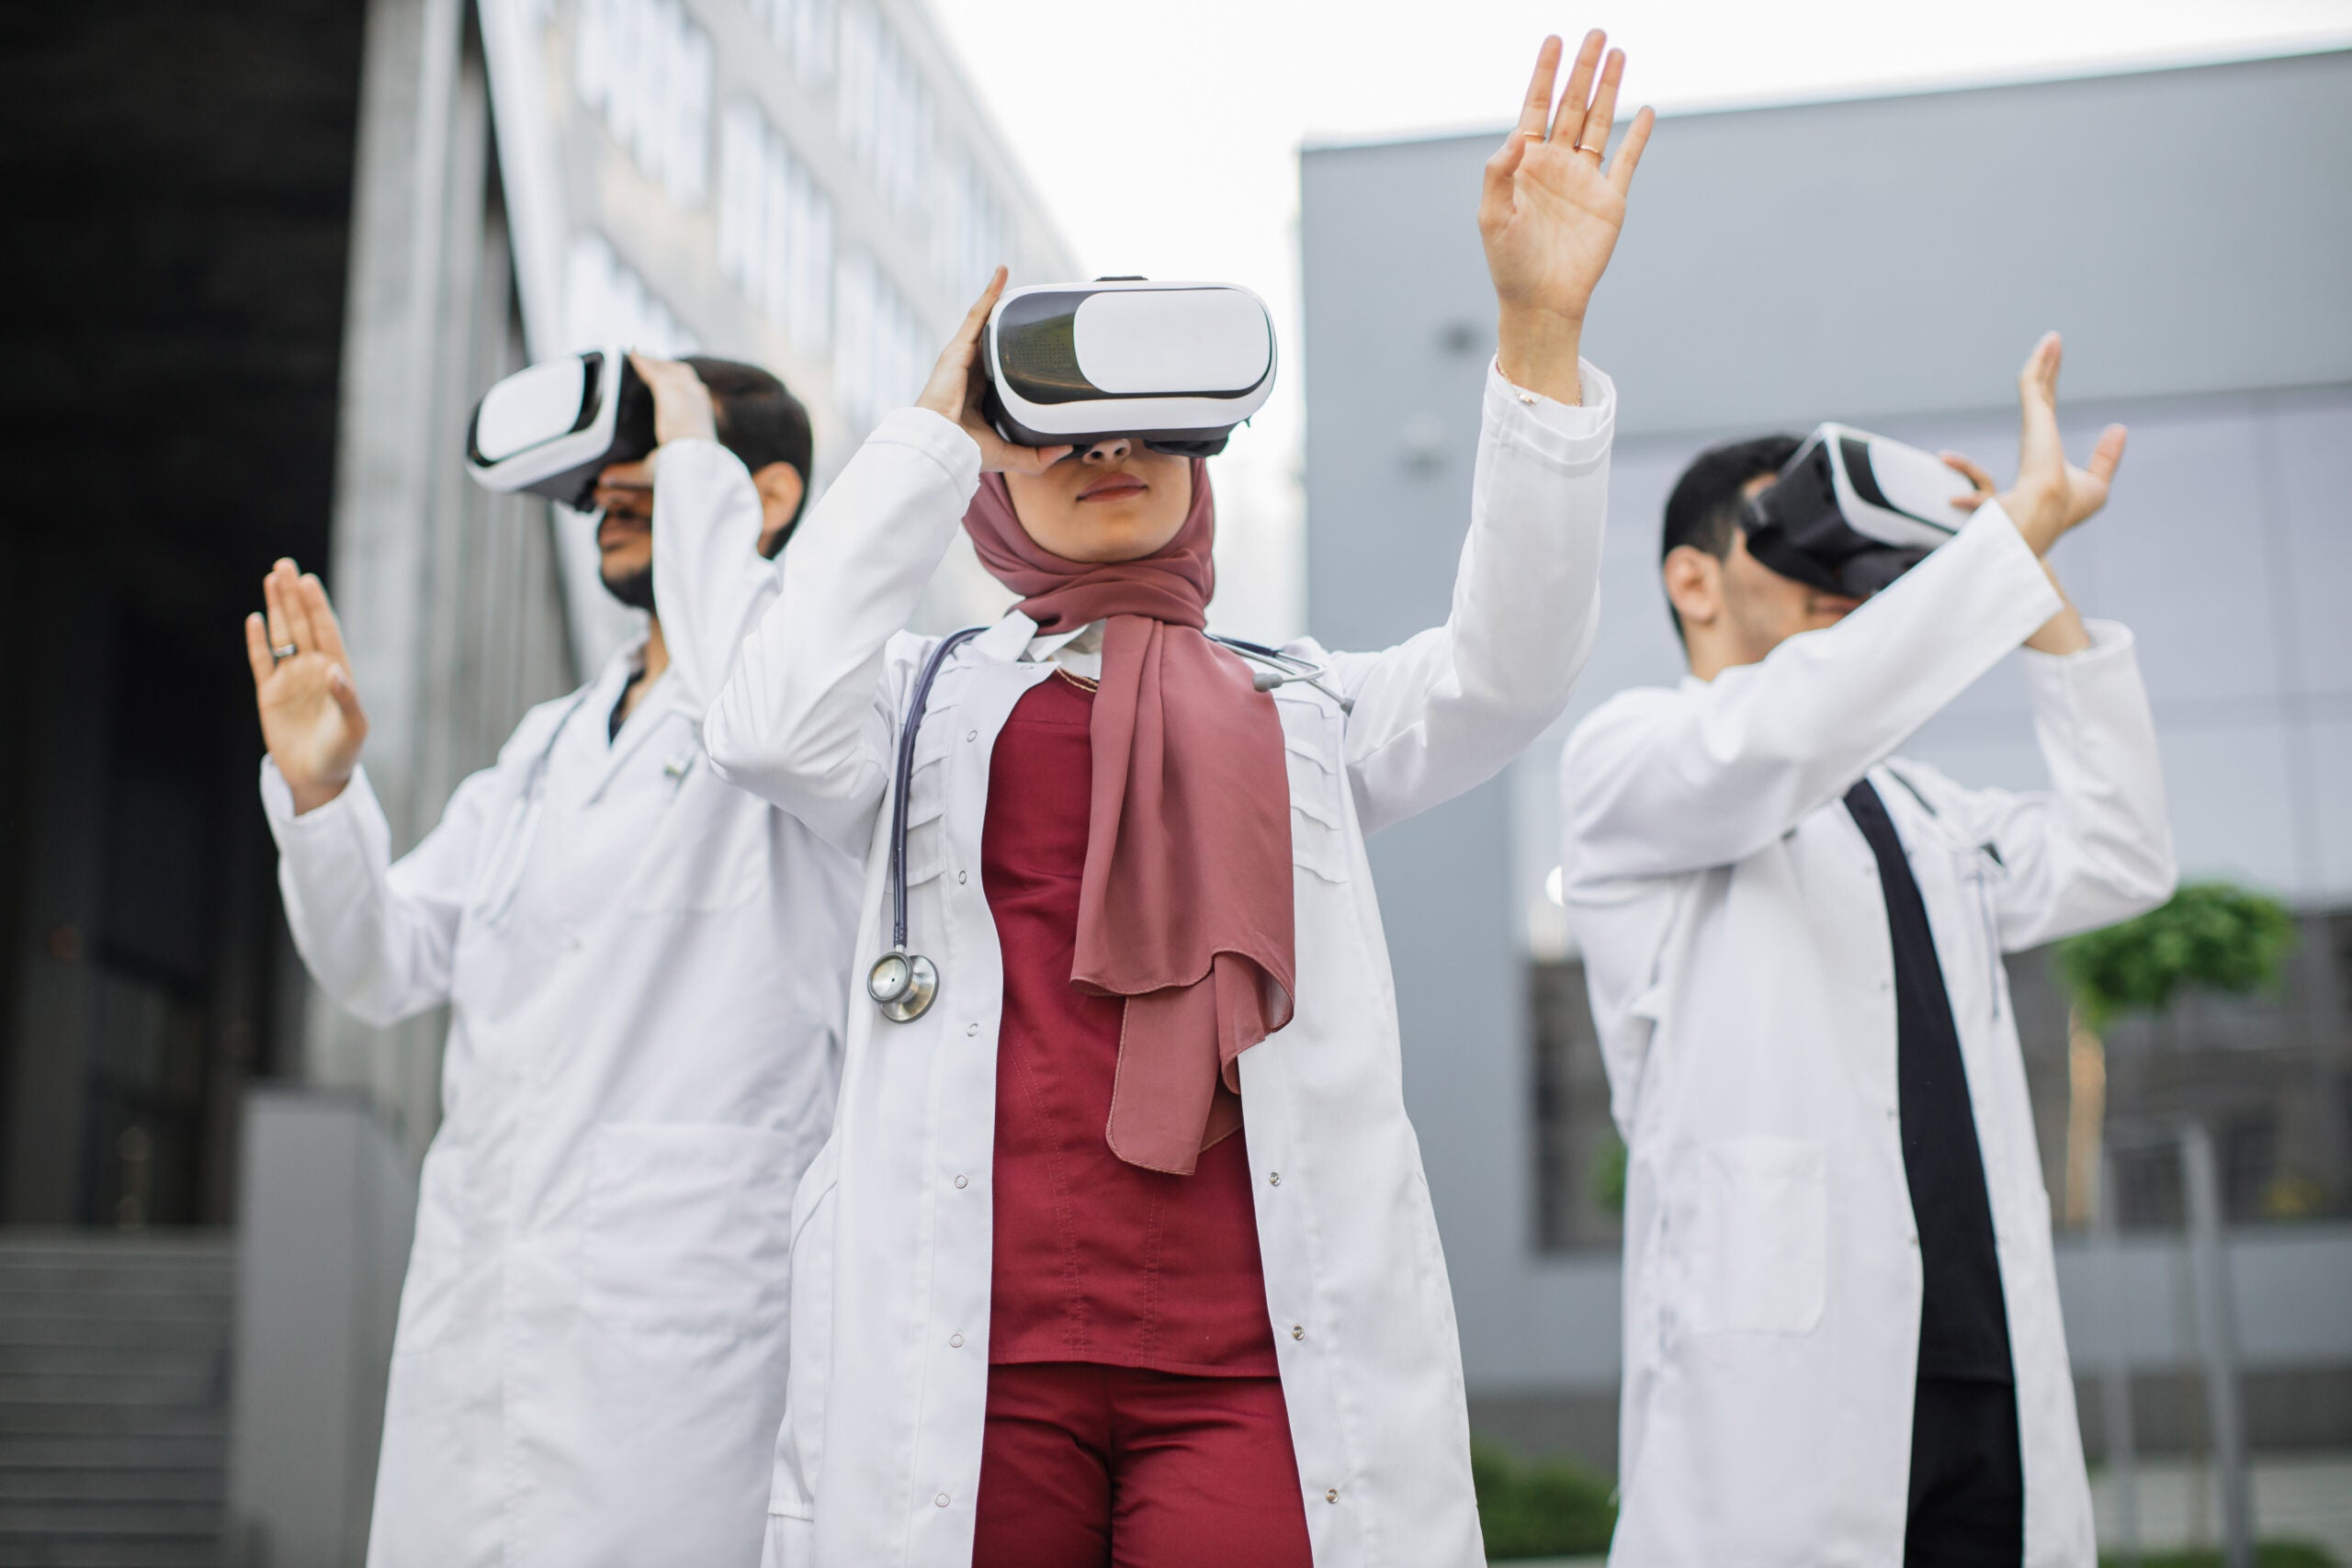 Are metaverse applications becoming a reality in medical training?